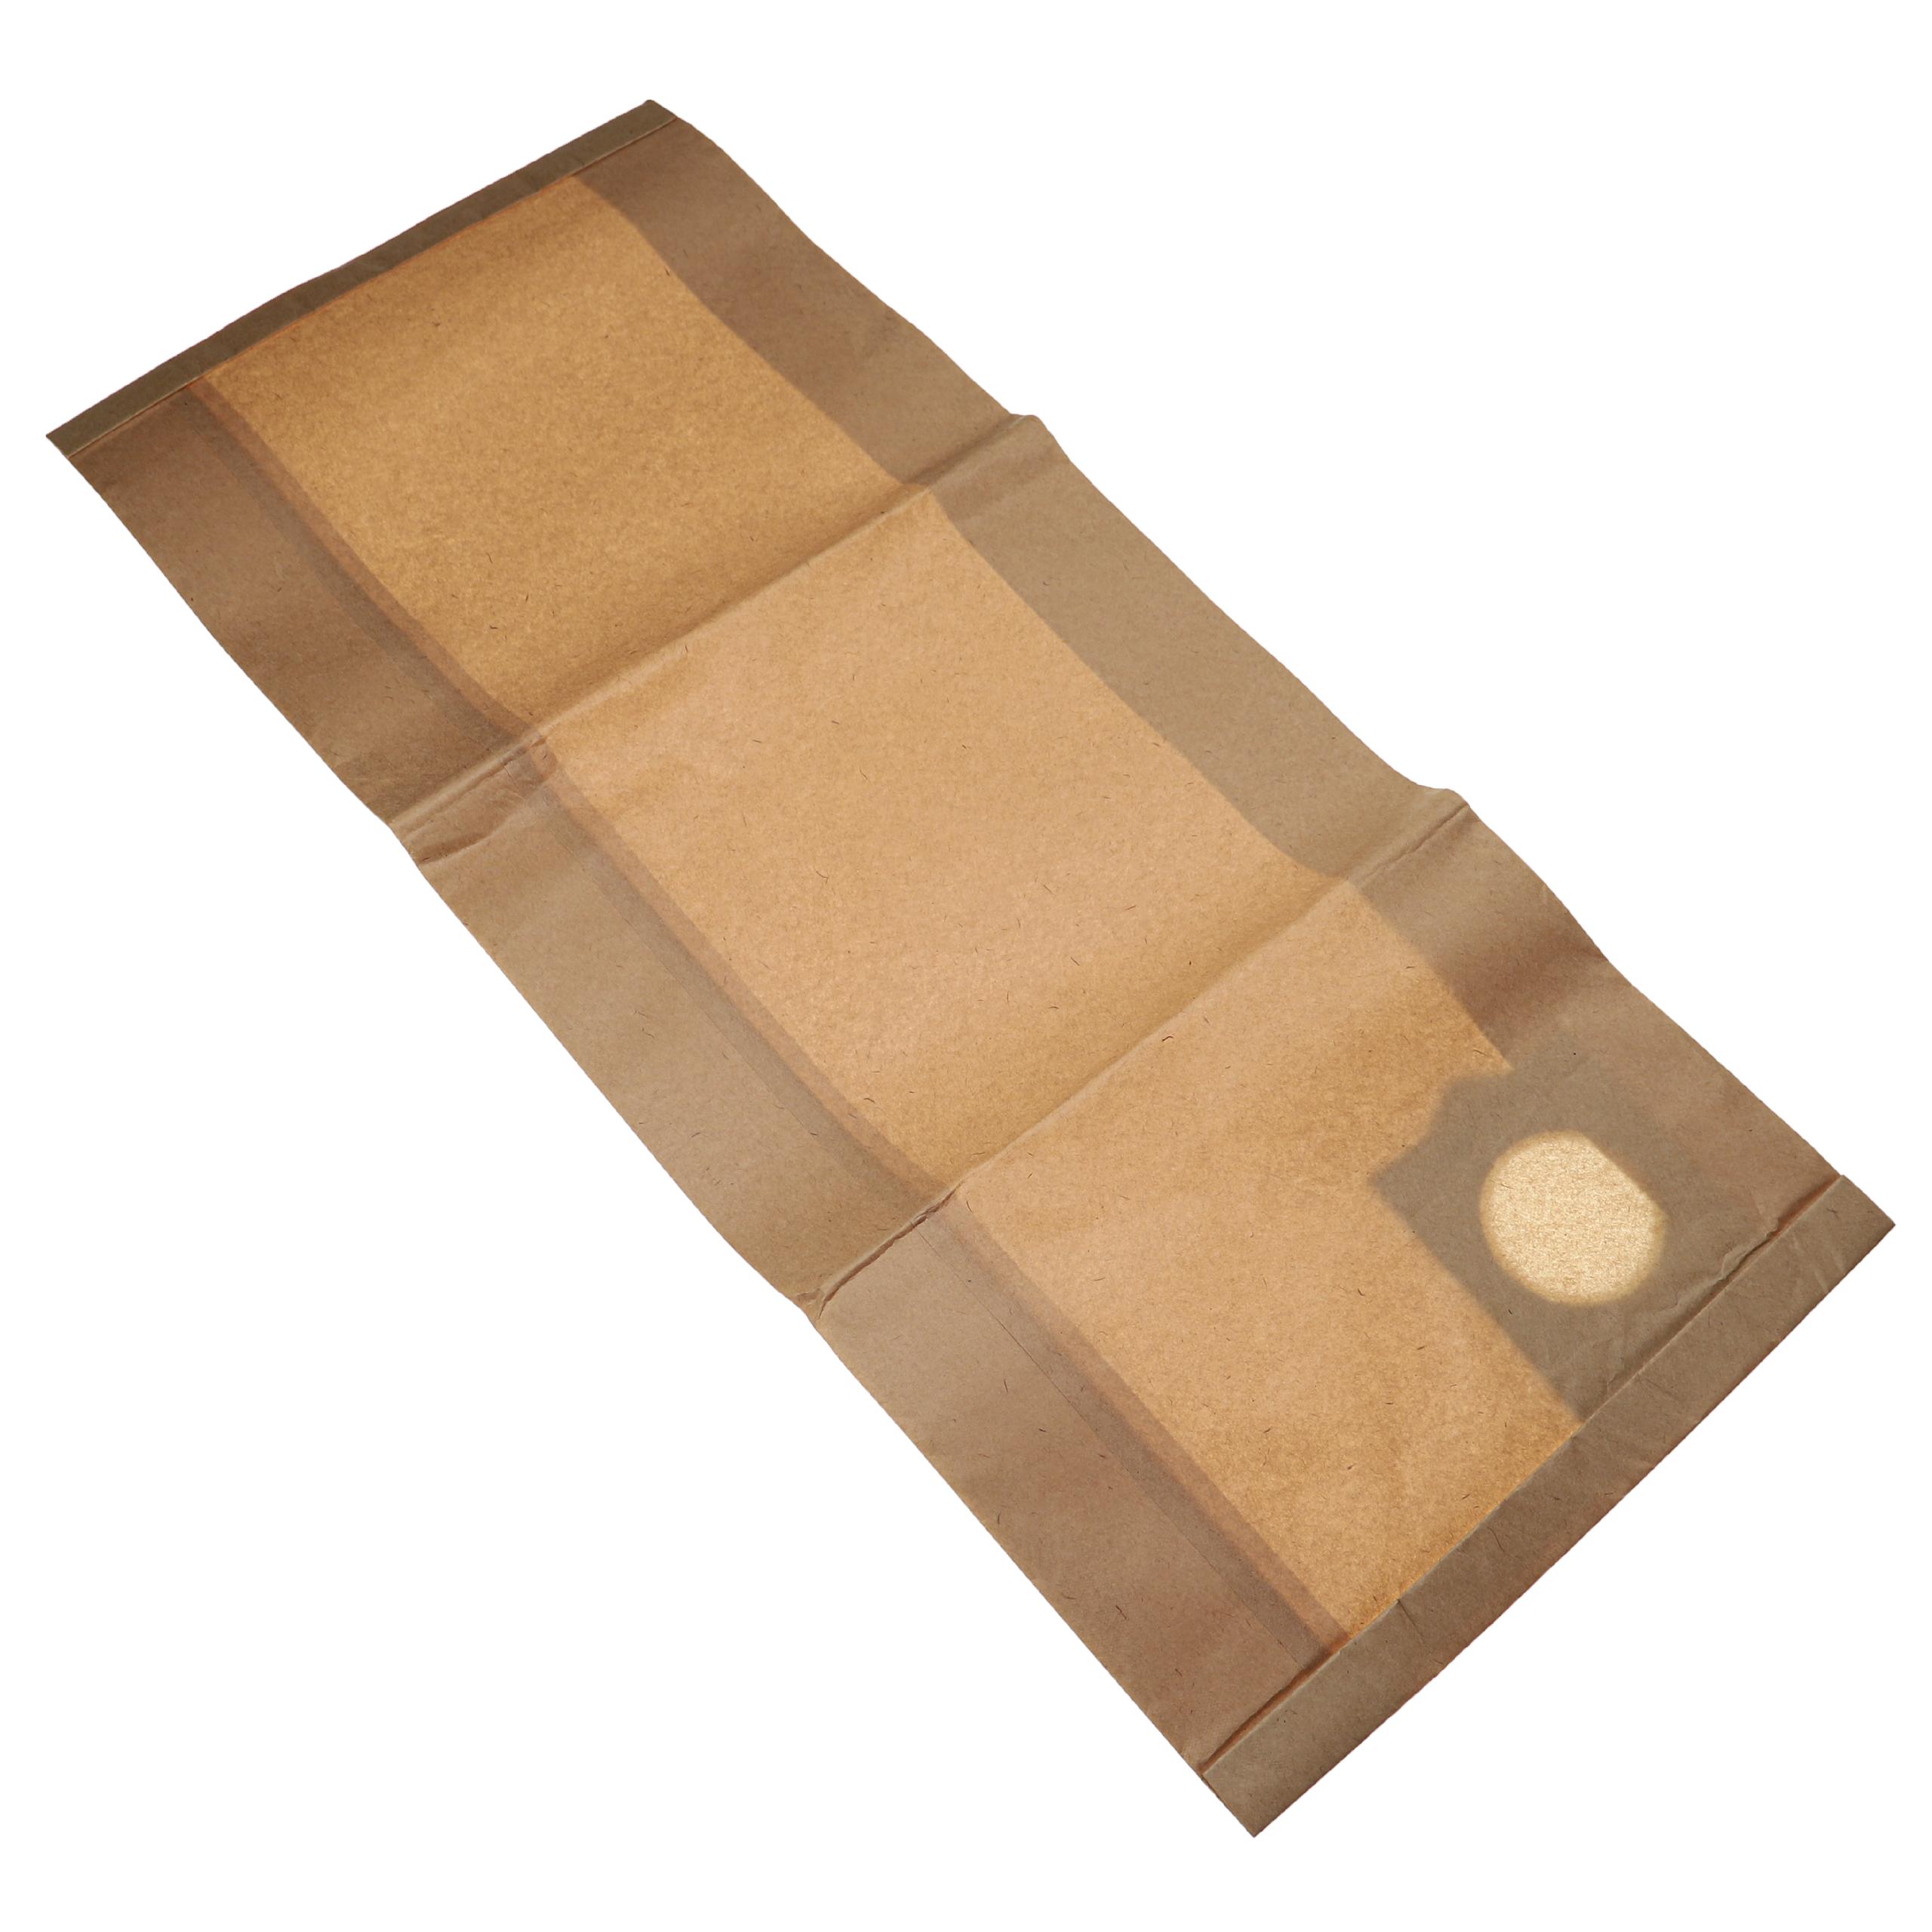 5x Vacuum Cleaner Bag replaces Bosch 2605411062, 3165140073622 for Bosch - paper